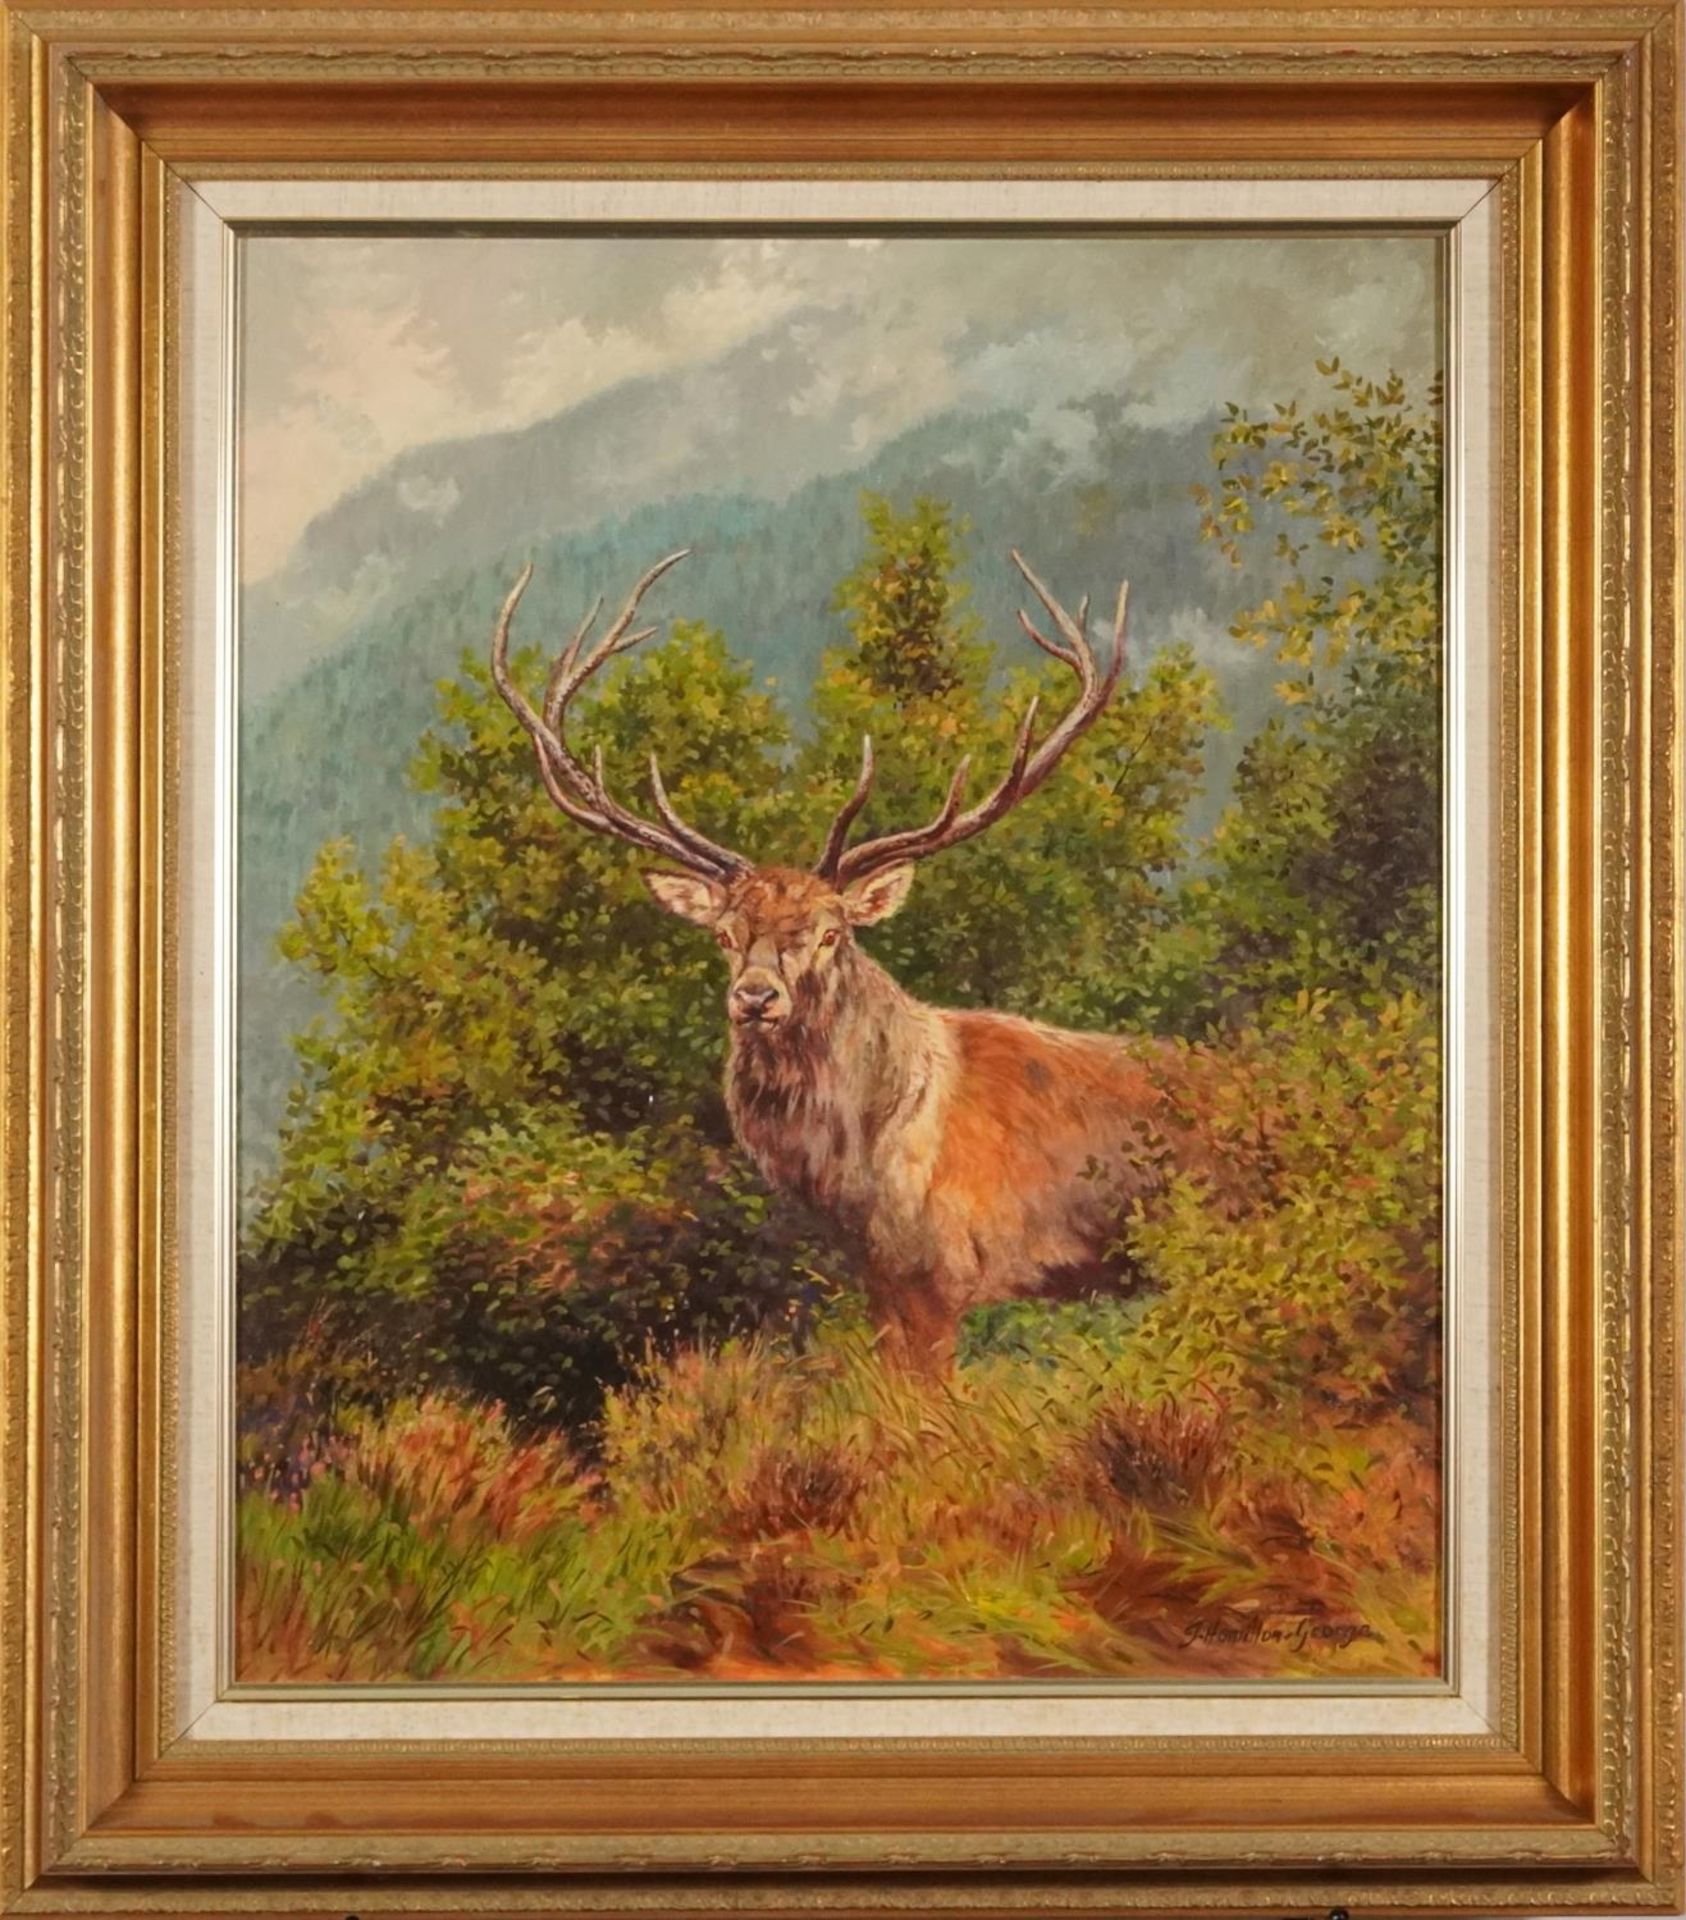 J Hamilton-George - Stag in a landscape, oil on canvas, mounted and framed, 60cm x 49.5cm - Image 2 of 5